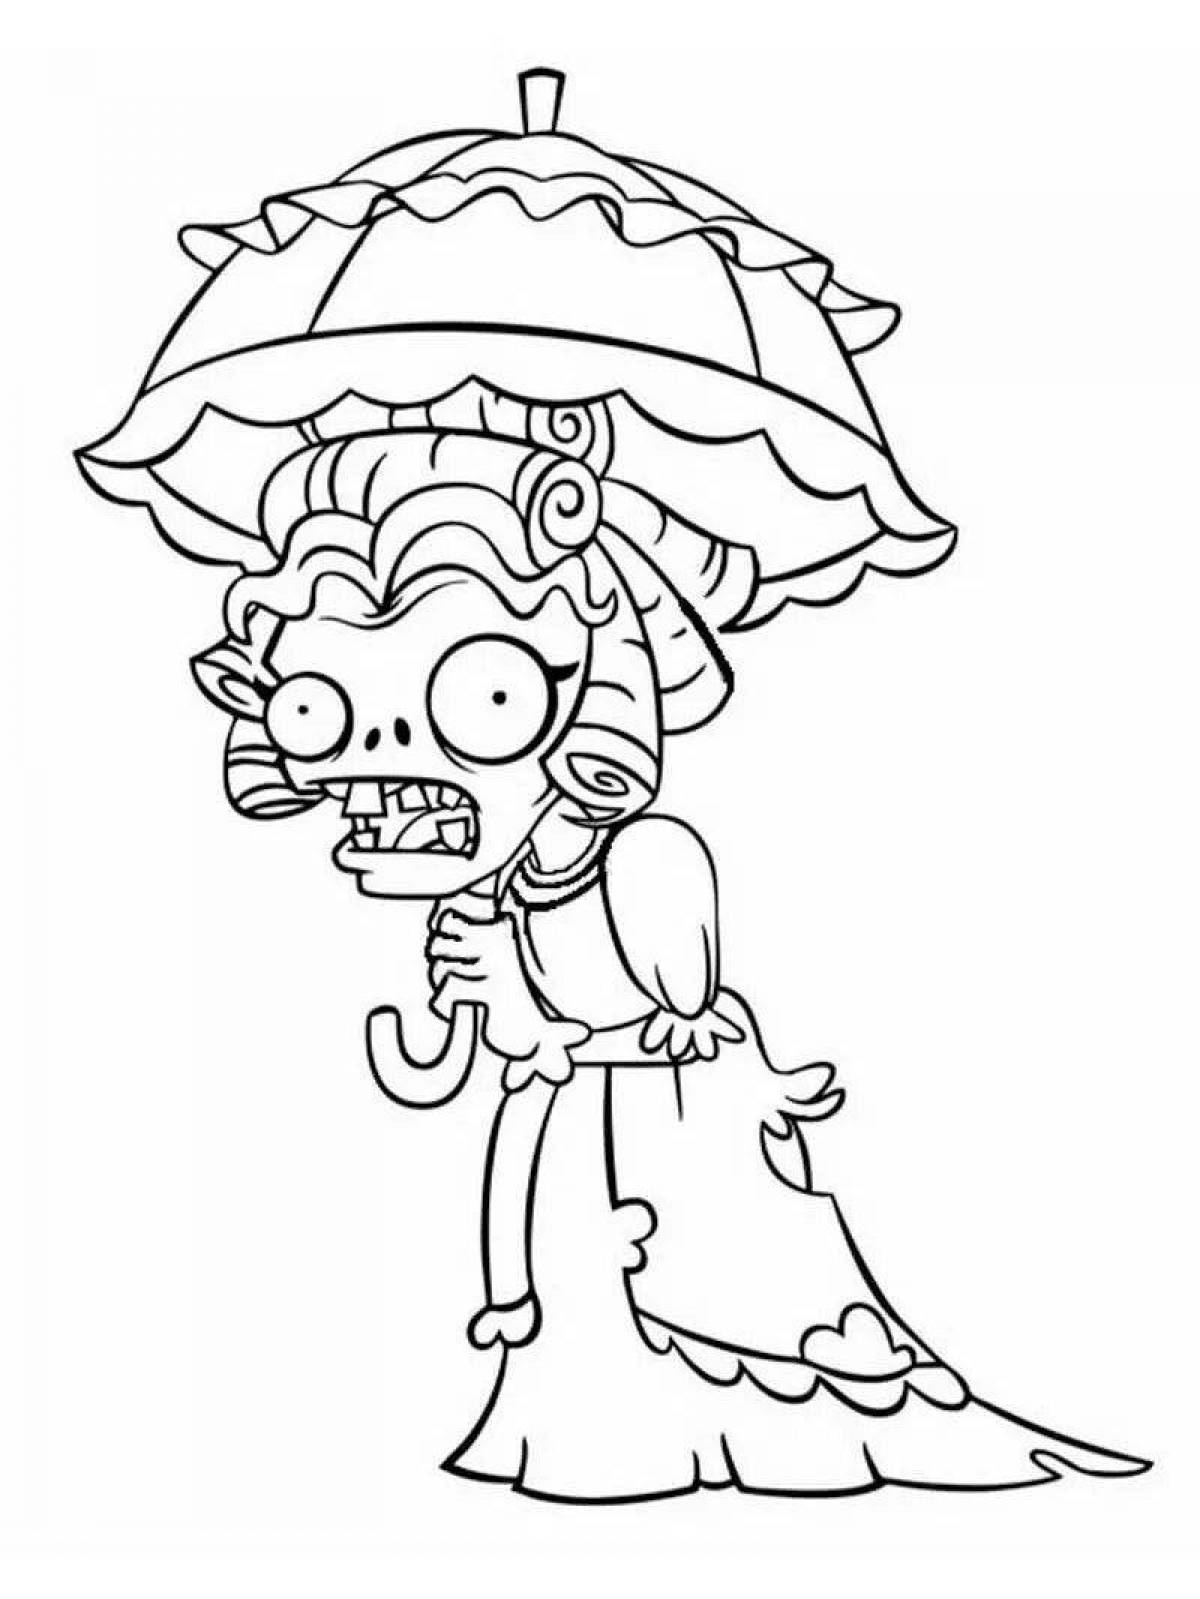 Terrifying zombie coloring book